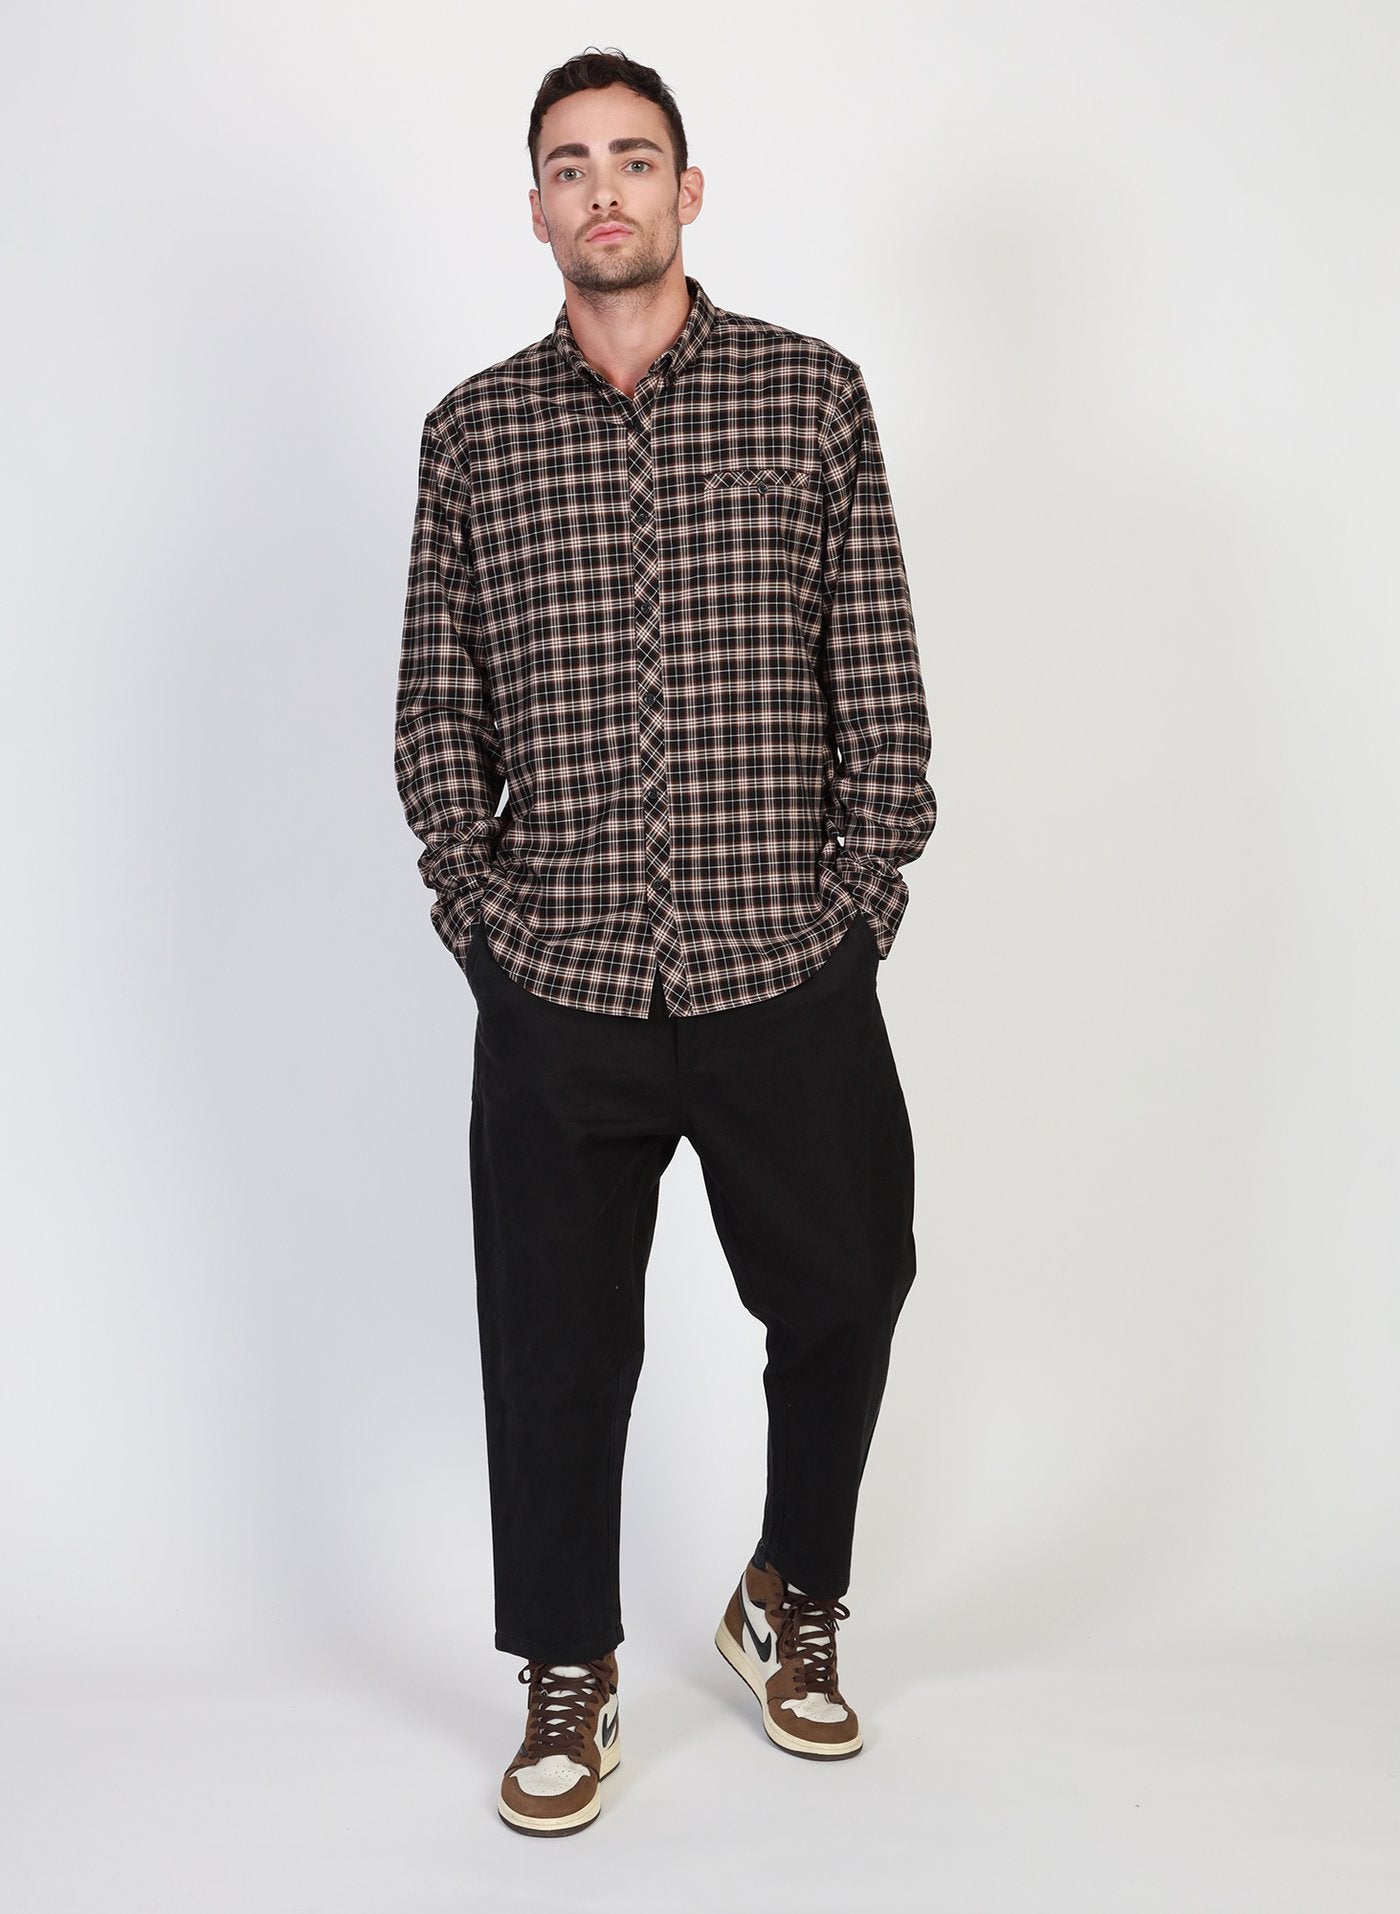 Federation - On Point Shirt - Coco Check